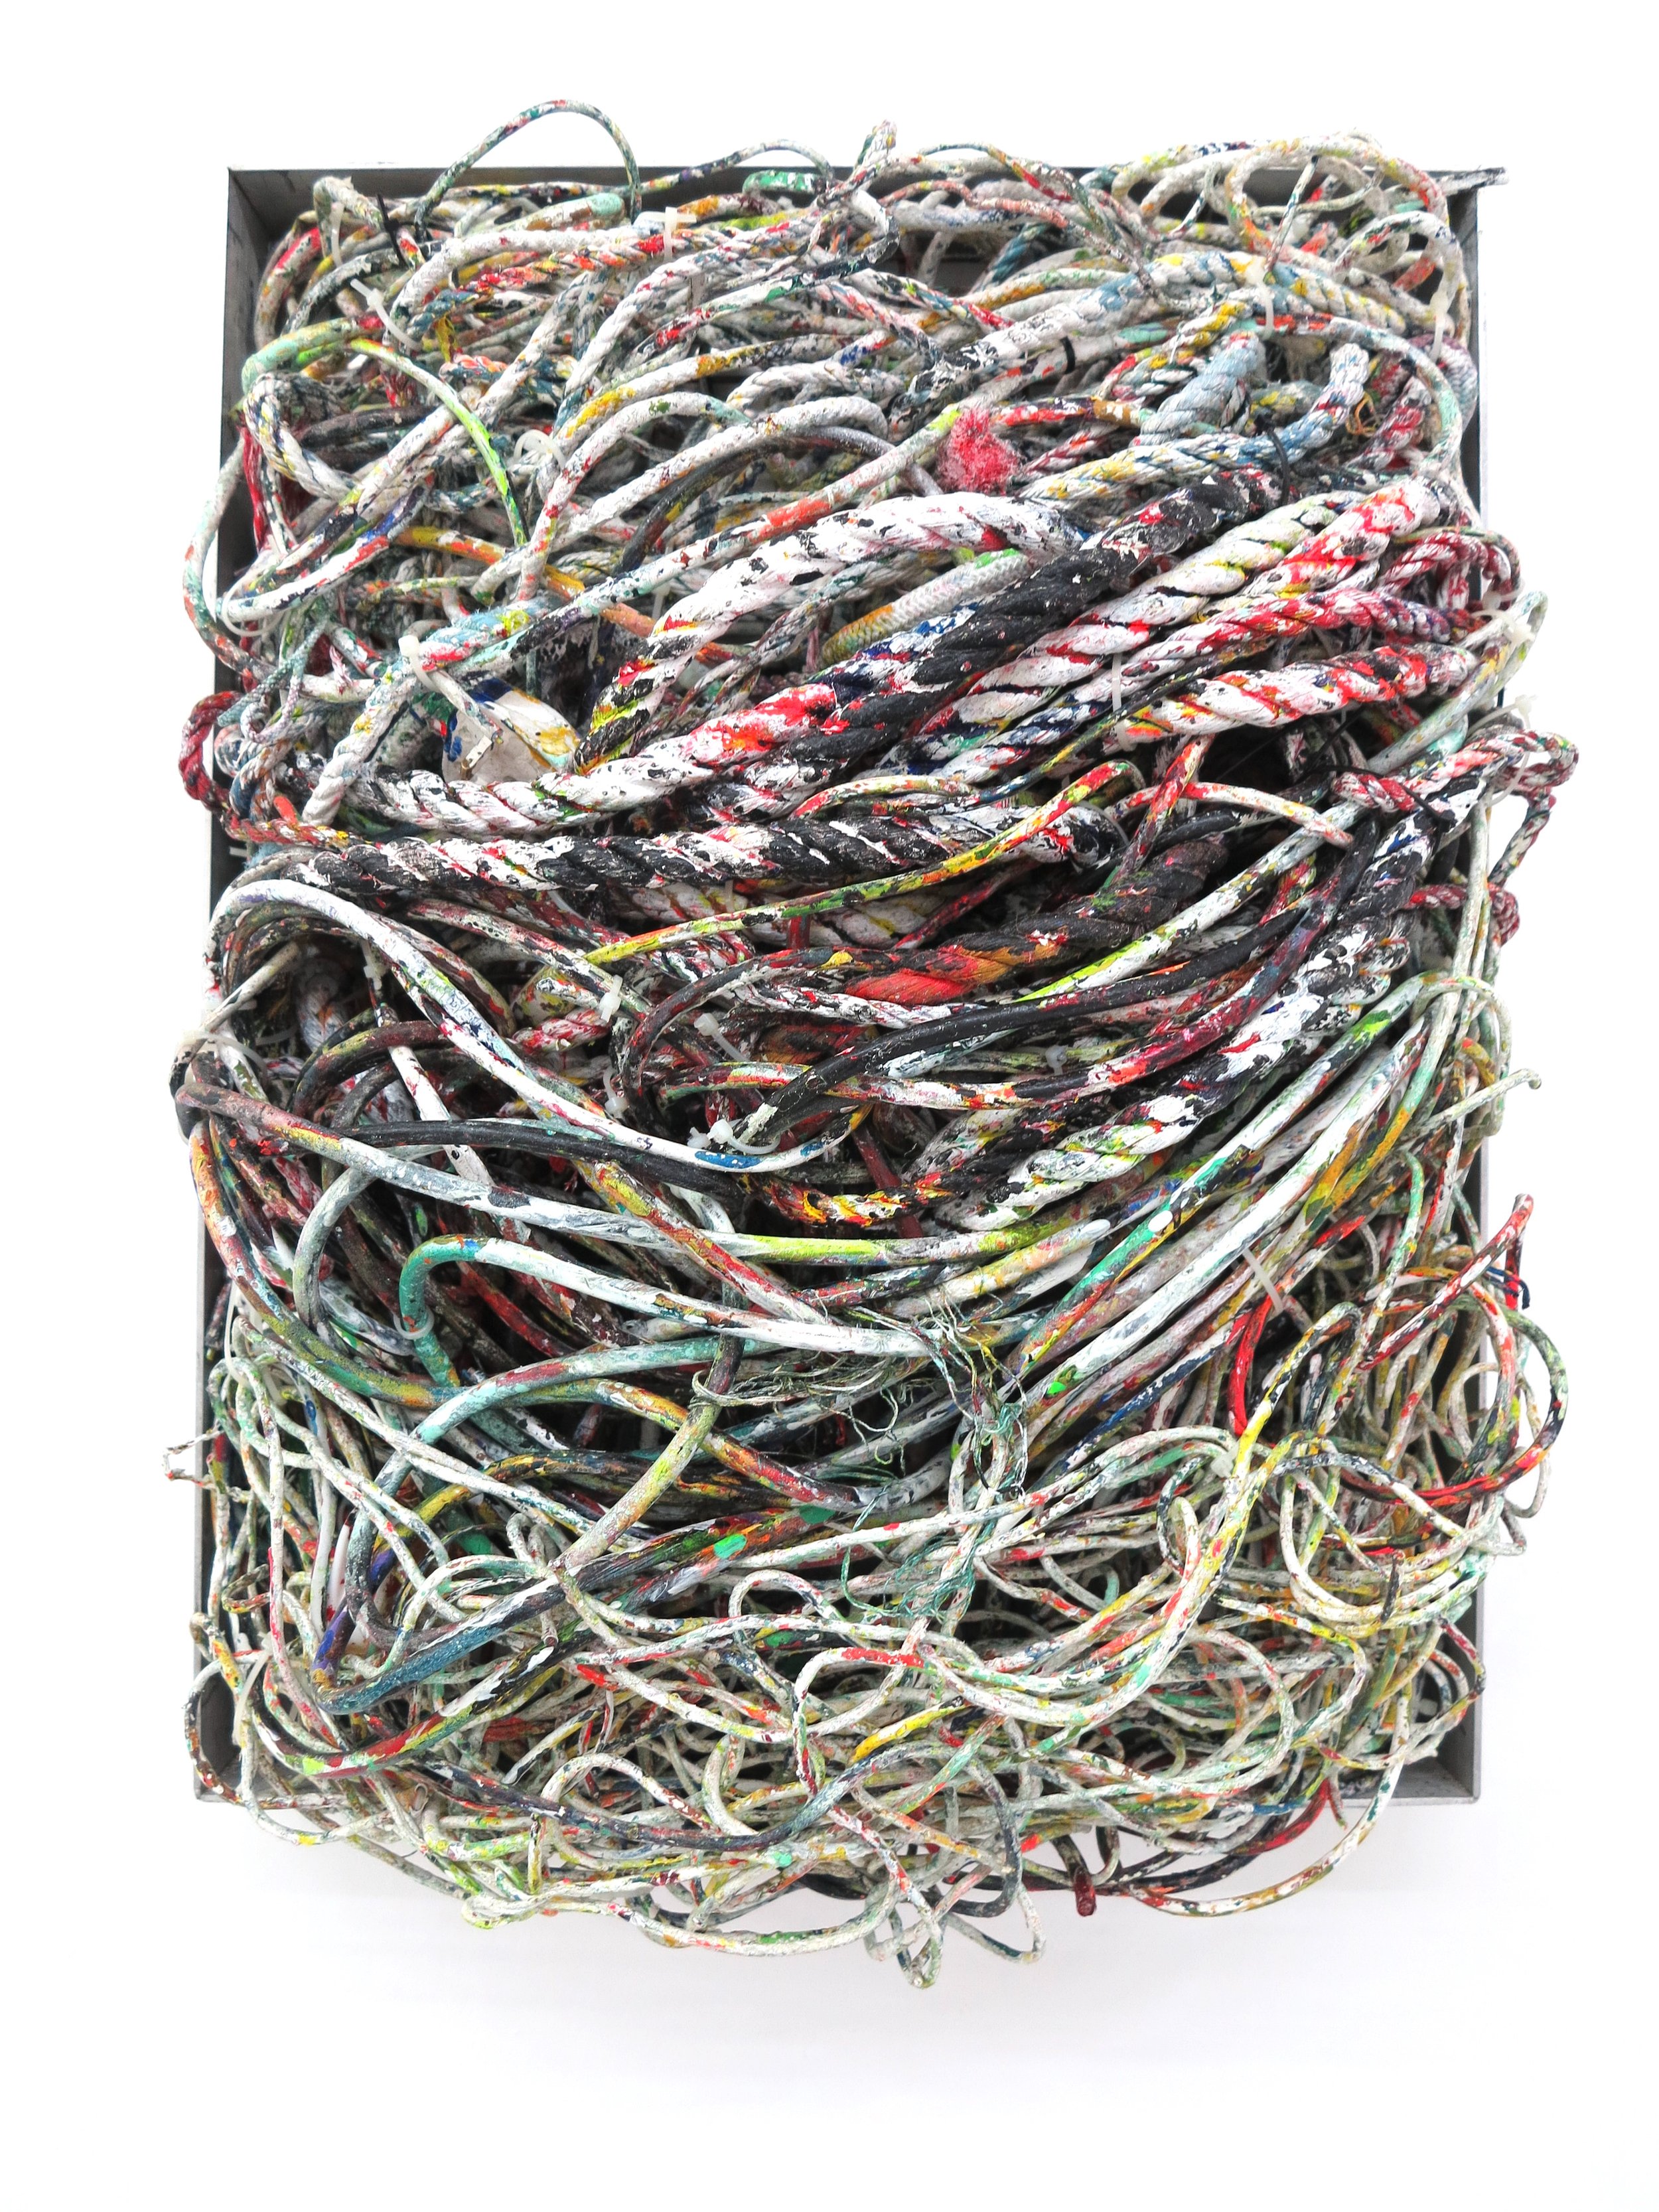   Short Circuit   Gleaned electrical wires, acrylic &amp; resin in a steel and aluminium frame  64 x 50 x 15 cm  Part of the  Autonomic Ambience Vol 1  solo presentation with Ruttkowski;68, at Pop;68, Cologne, Germany 2023 